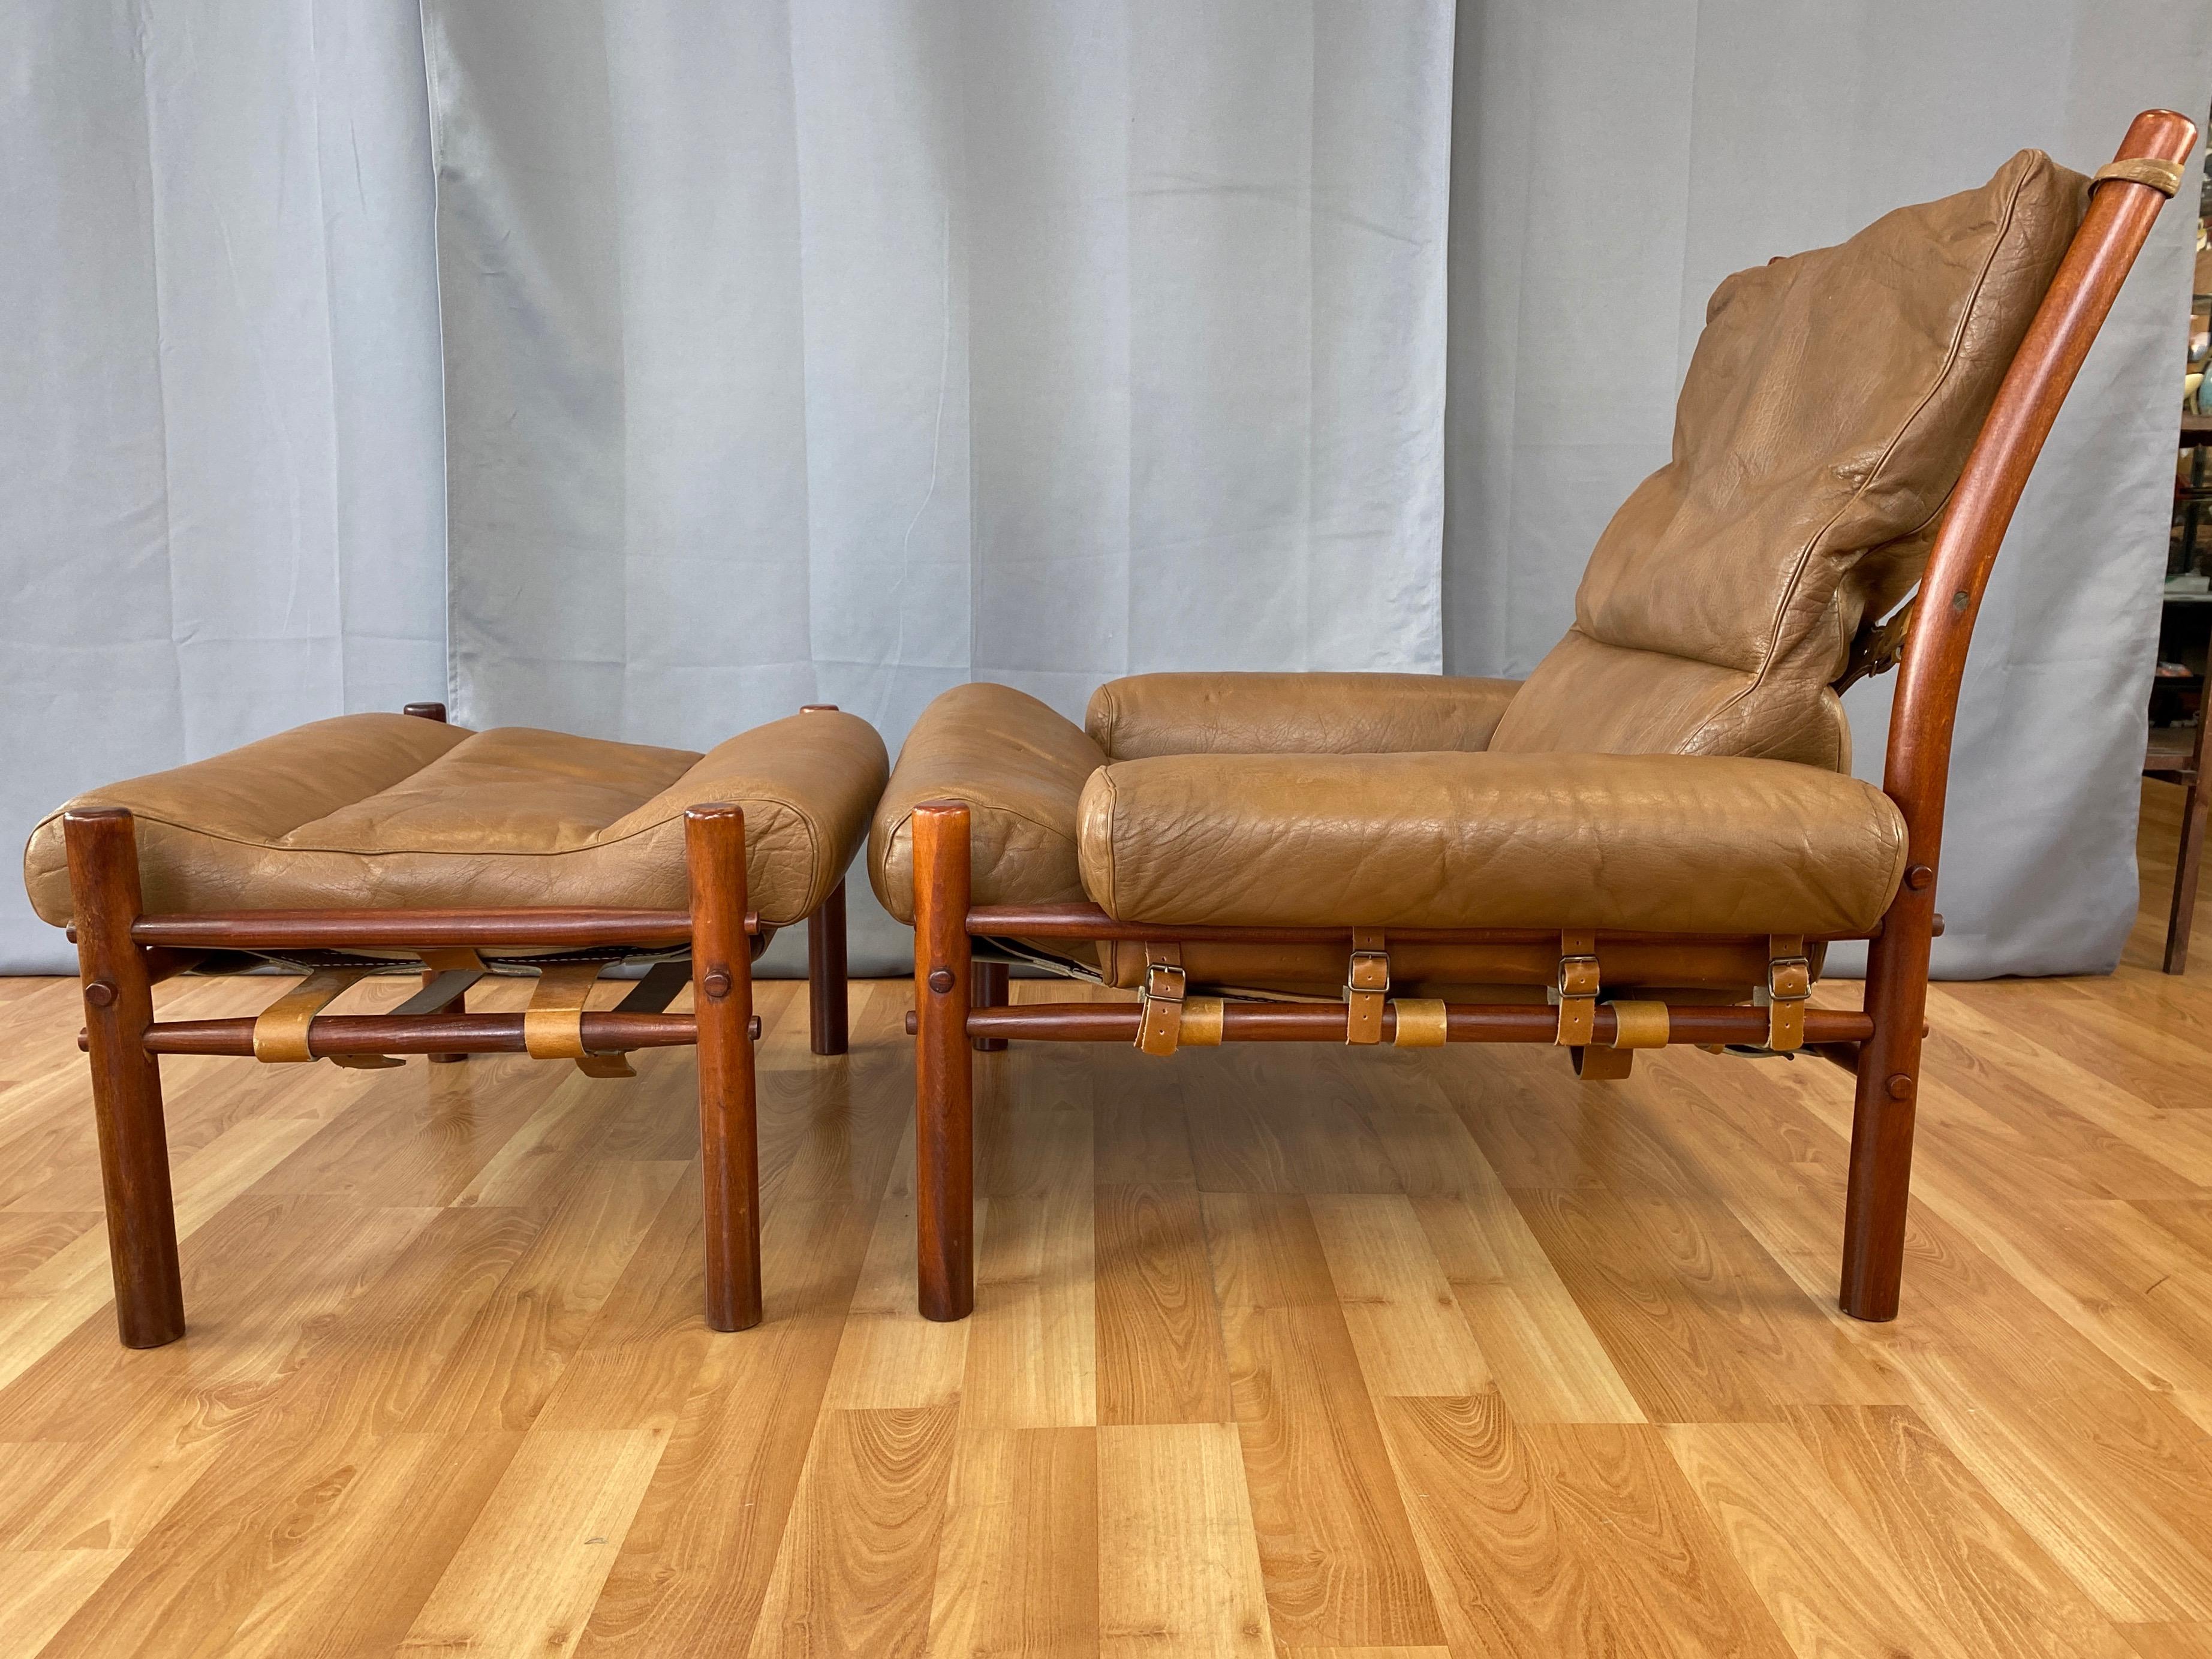 Stained Arne Norell Inca Lounge Chair & Ottoman in Teak-Colored Beech and Leather, 1970s